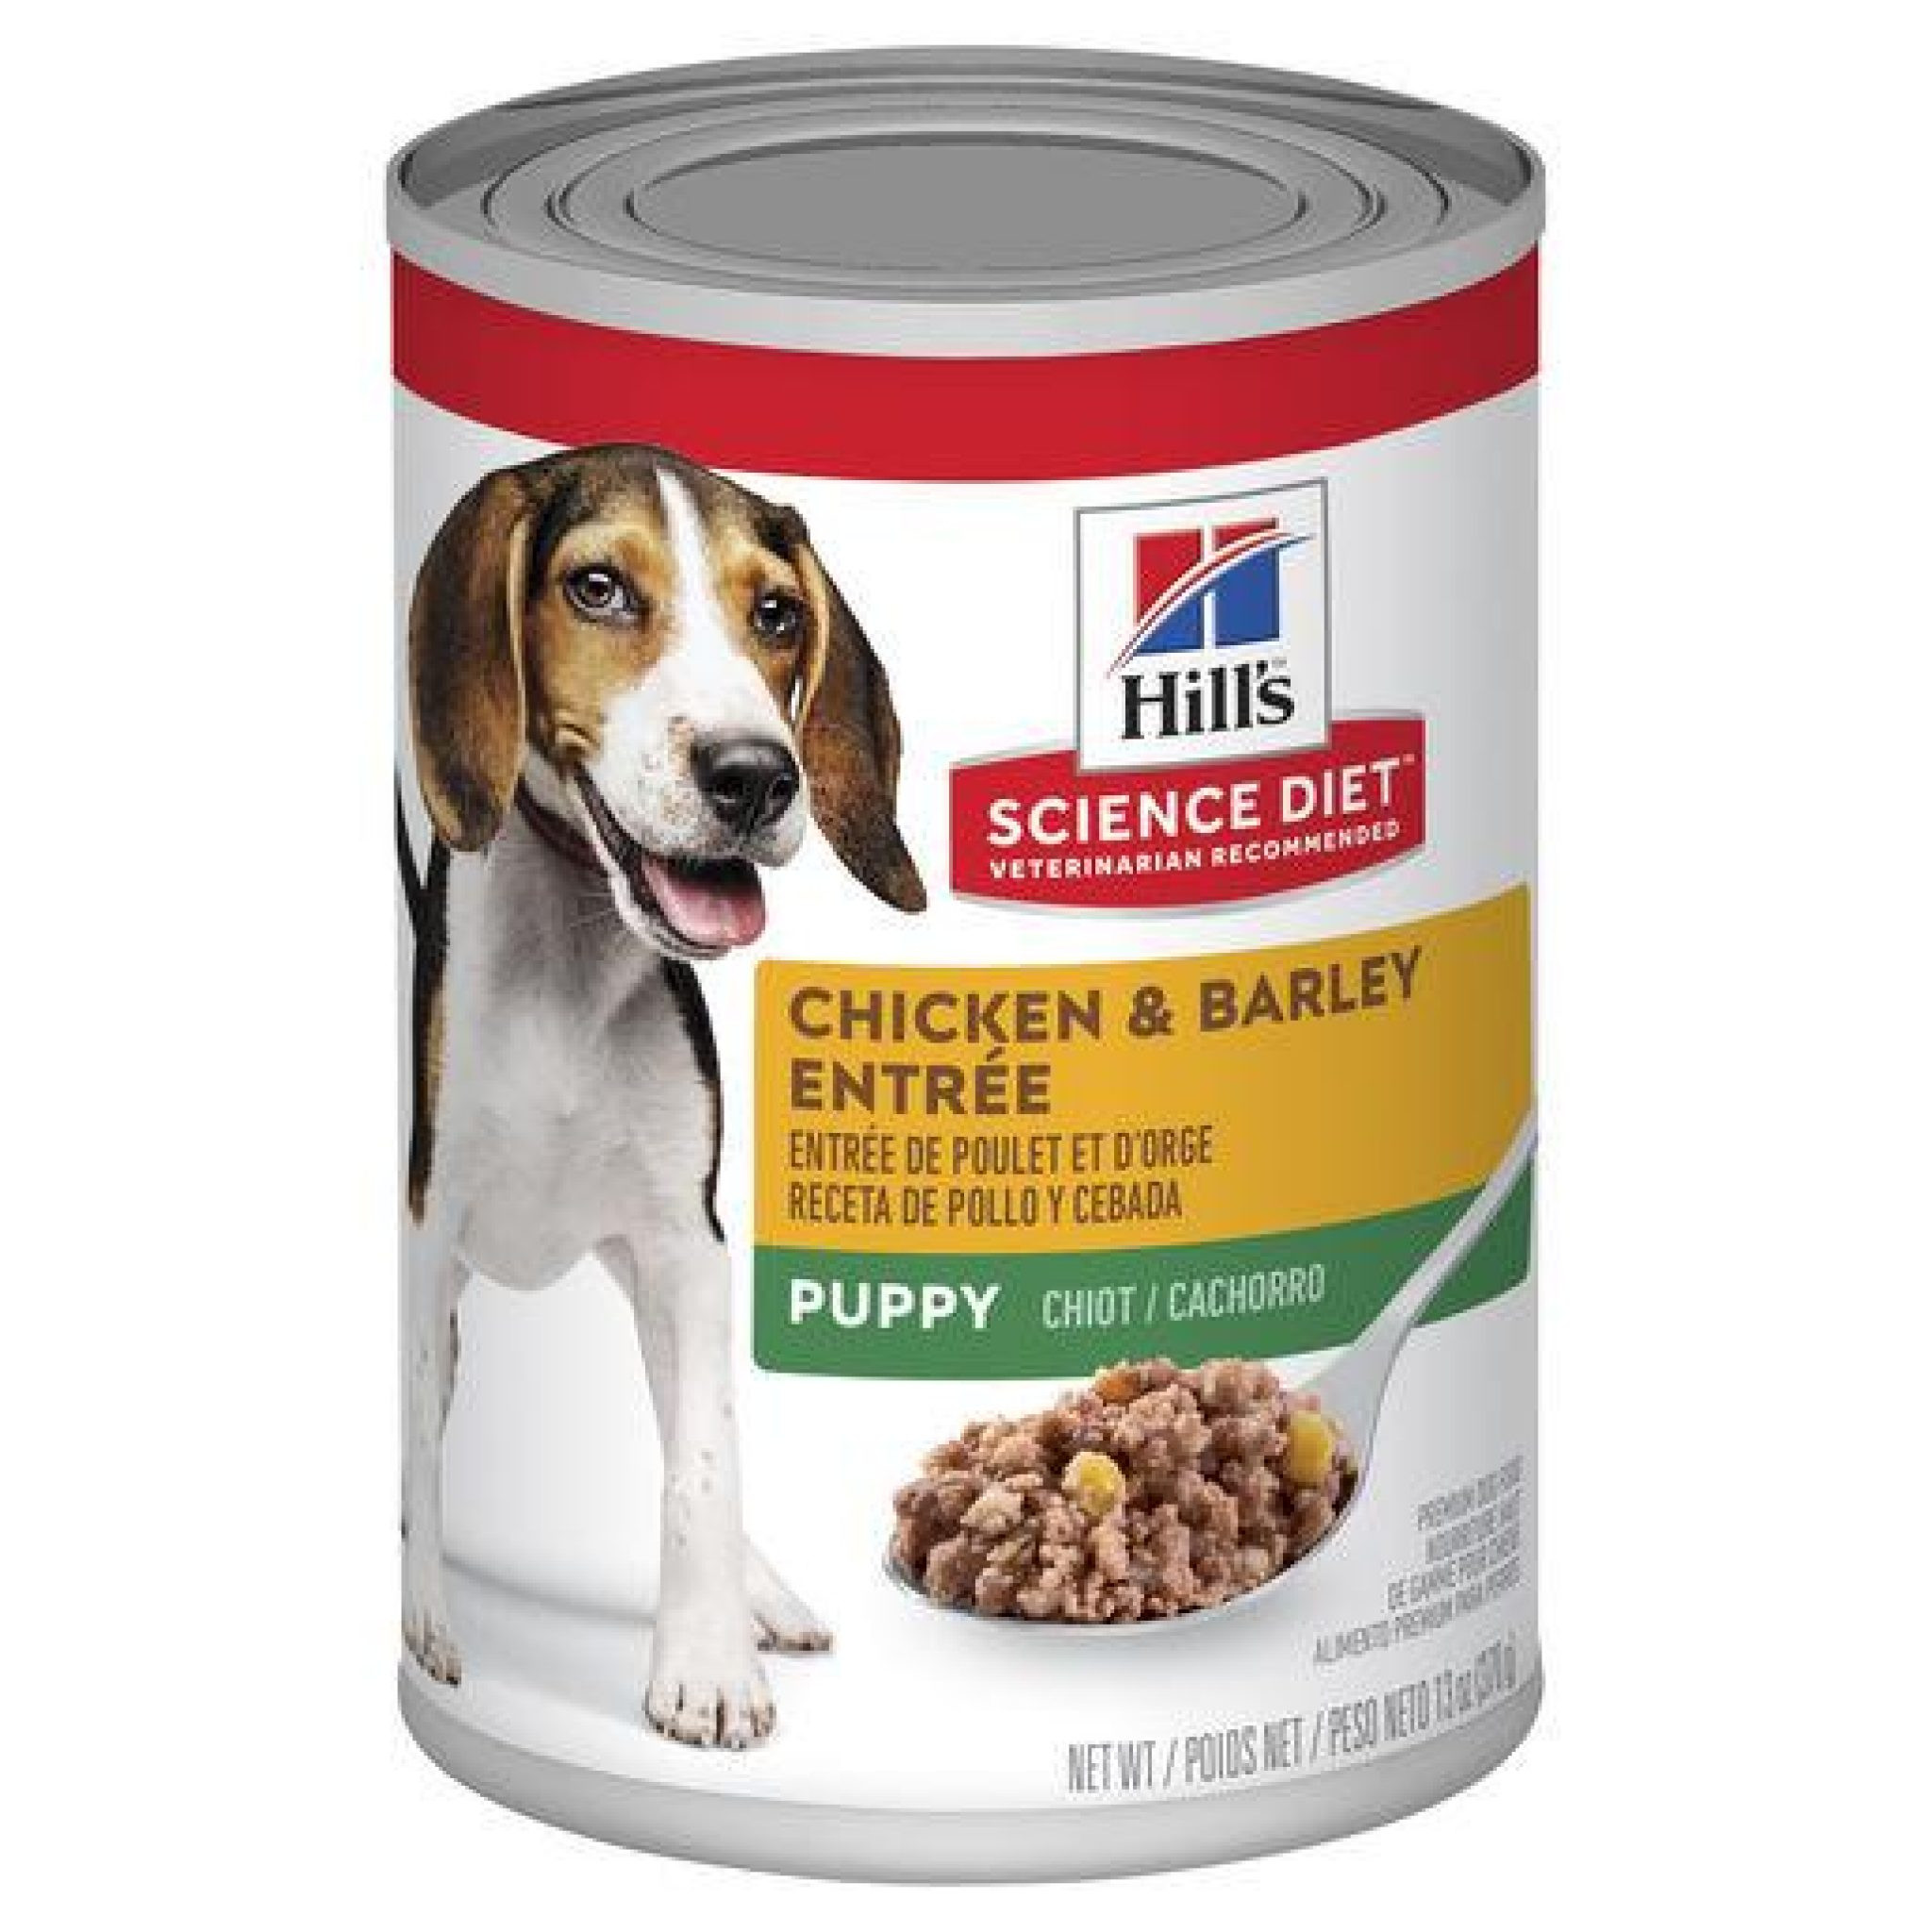 Science Diet Chicken and Barley Lovely Hill S Science Diet Puppy Chicken &amp; Barley Entrée Canned